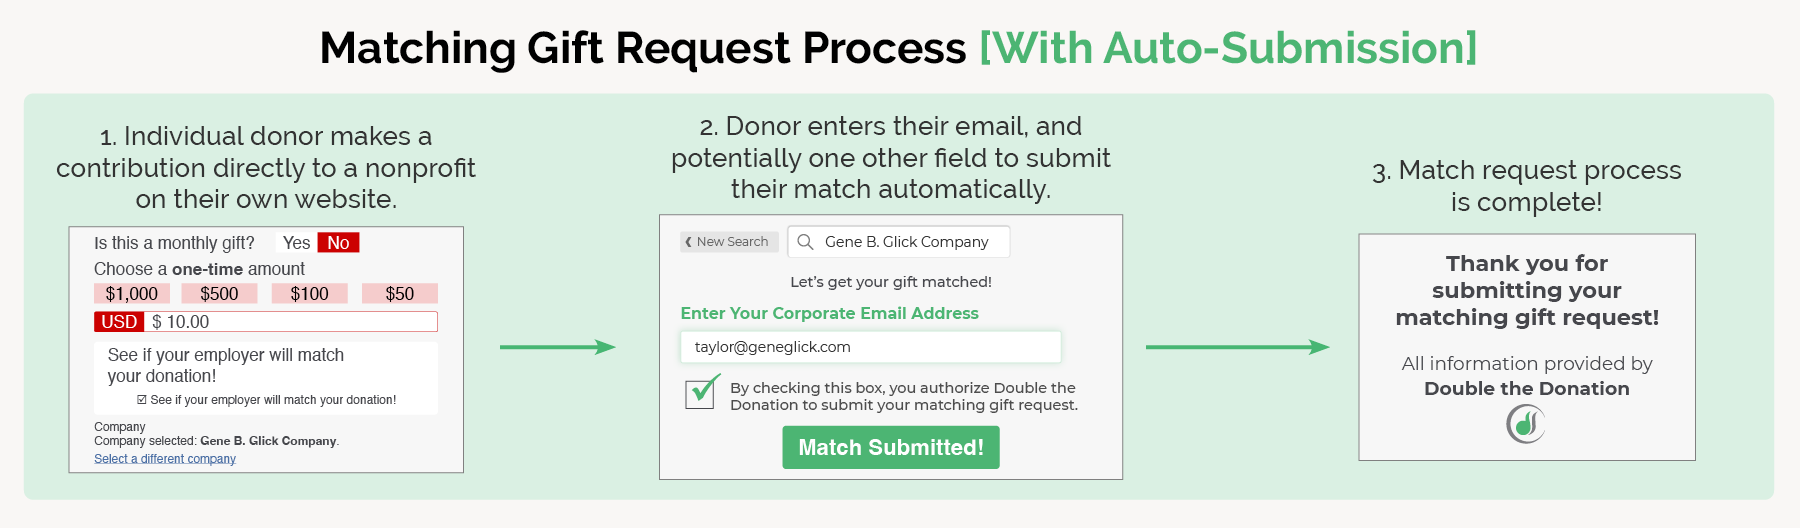 How matching gift auto-submission works